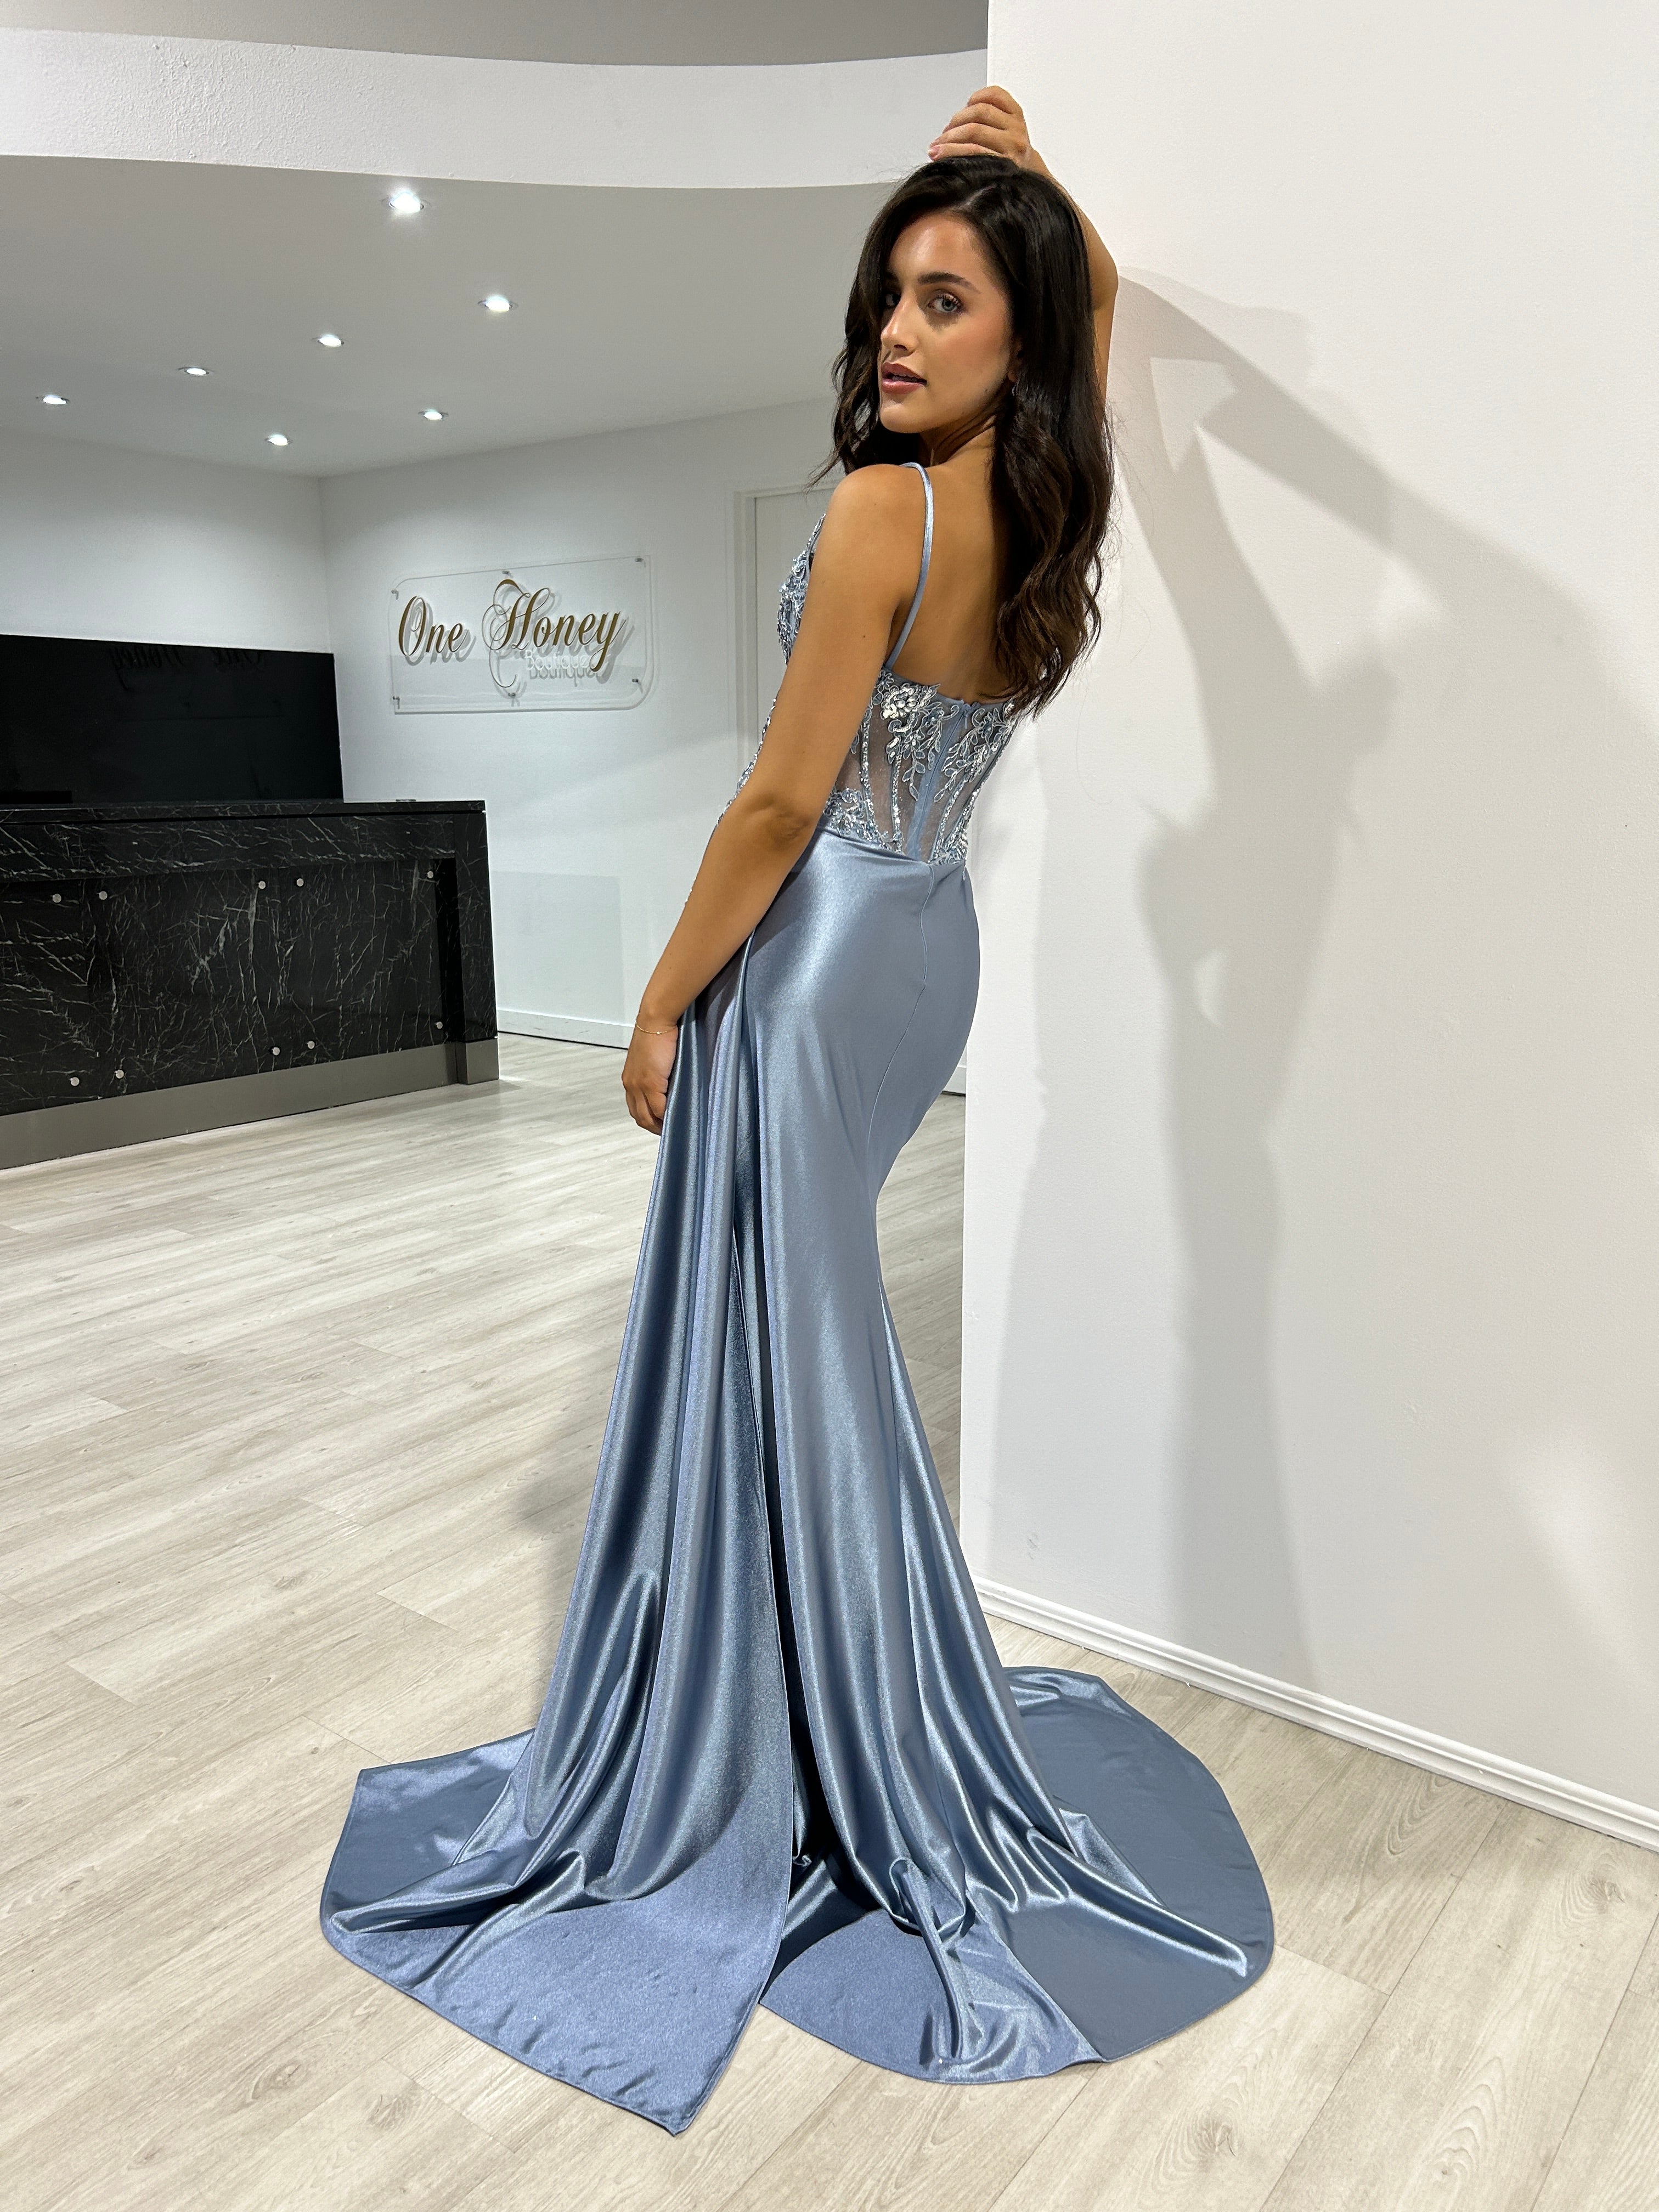 Honey Couture STERLING Dusty Blue Embellished Corset Satin Mermaid Formal Dress